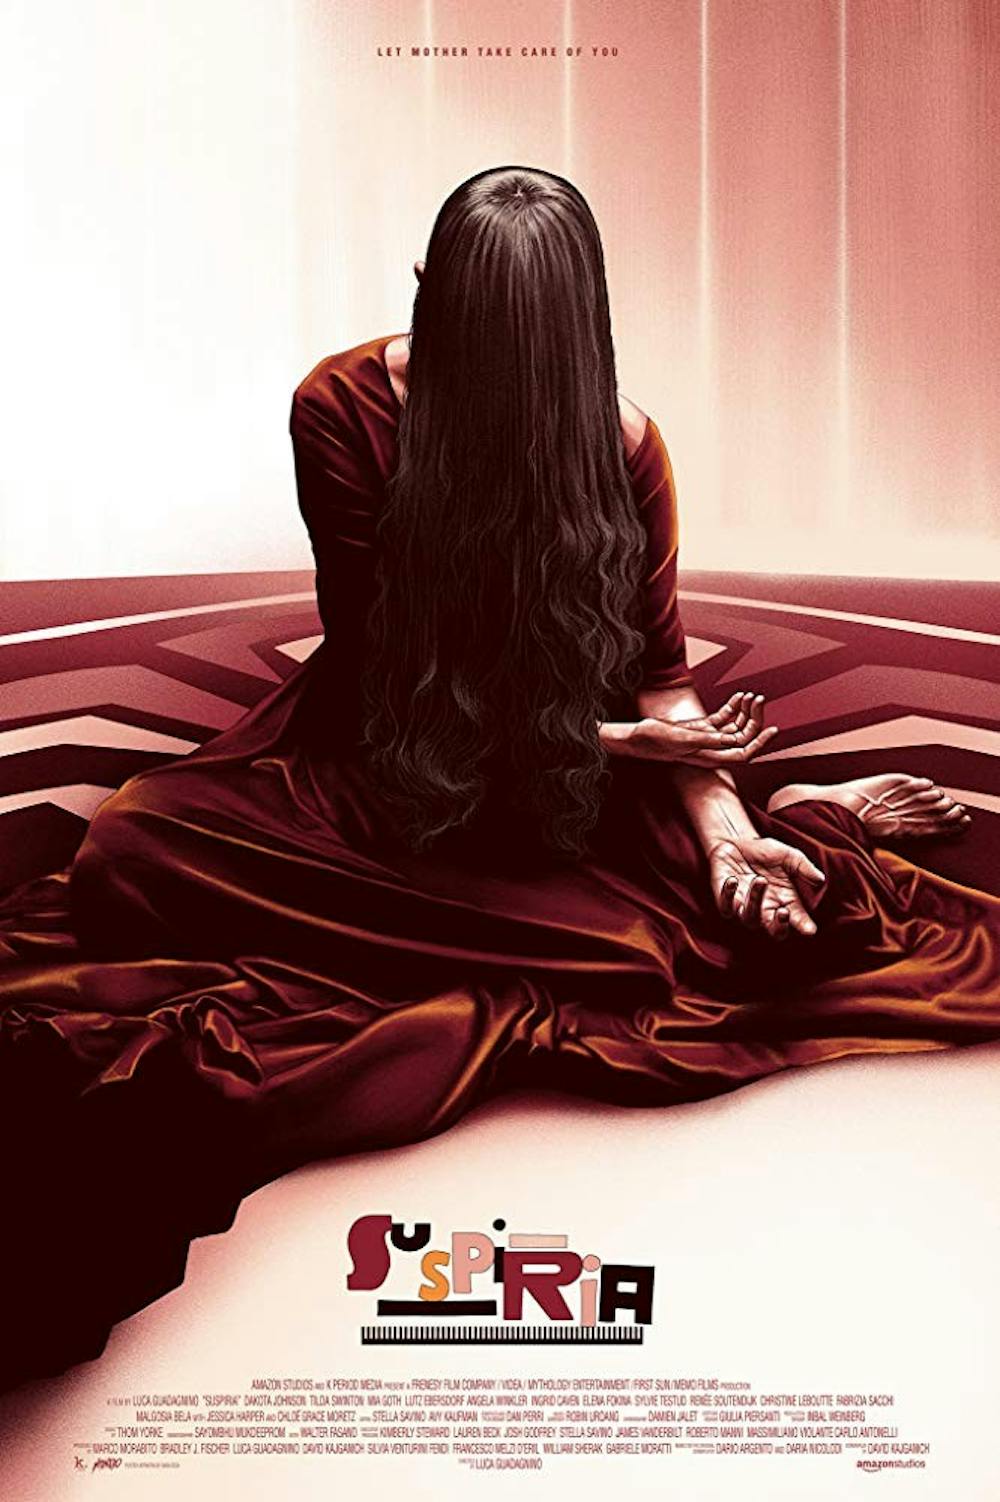 <p>"Suspiria" follows the toxic relationship between ballet dancers and a renowned dance company. The film is one of many spooky selections coming out this Halloween season.</p>